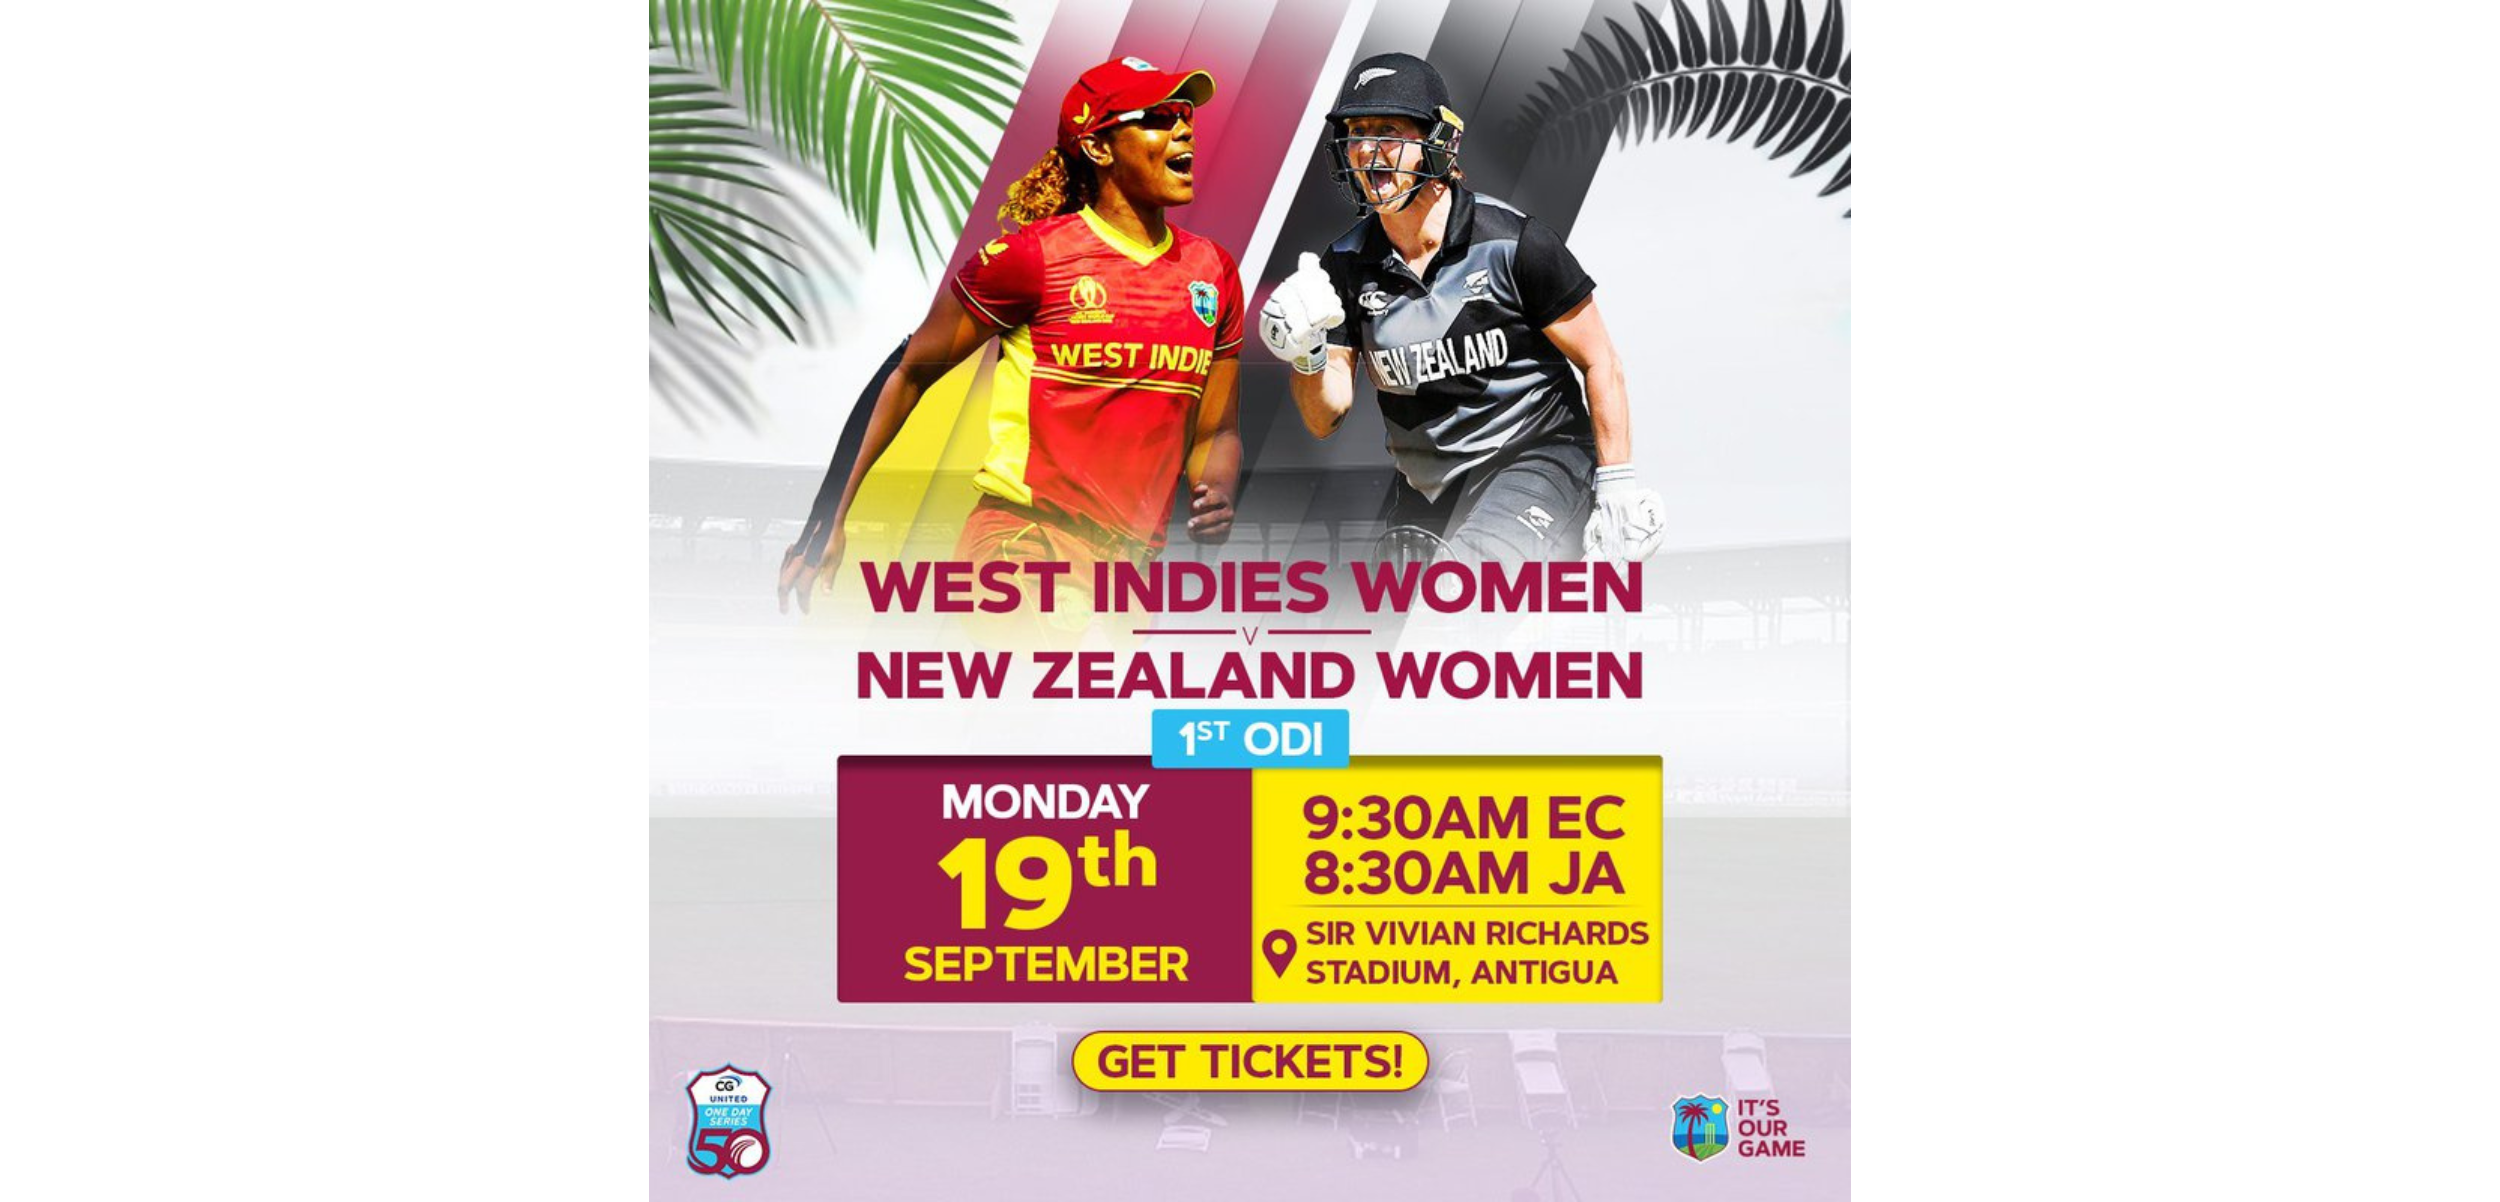 Cricket West Indies Women v New Zealand | 1st ODI - Monday 19th | Tickets & More!